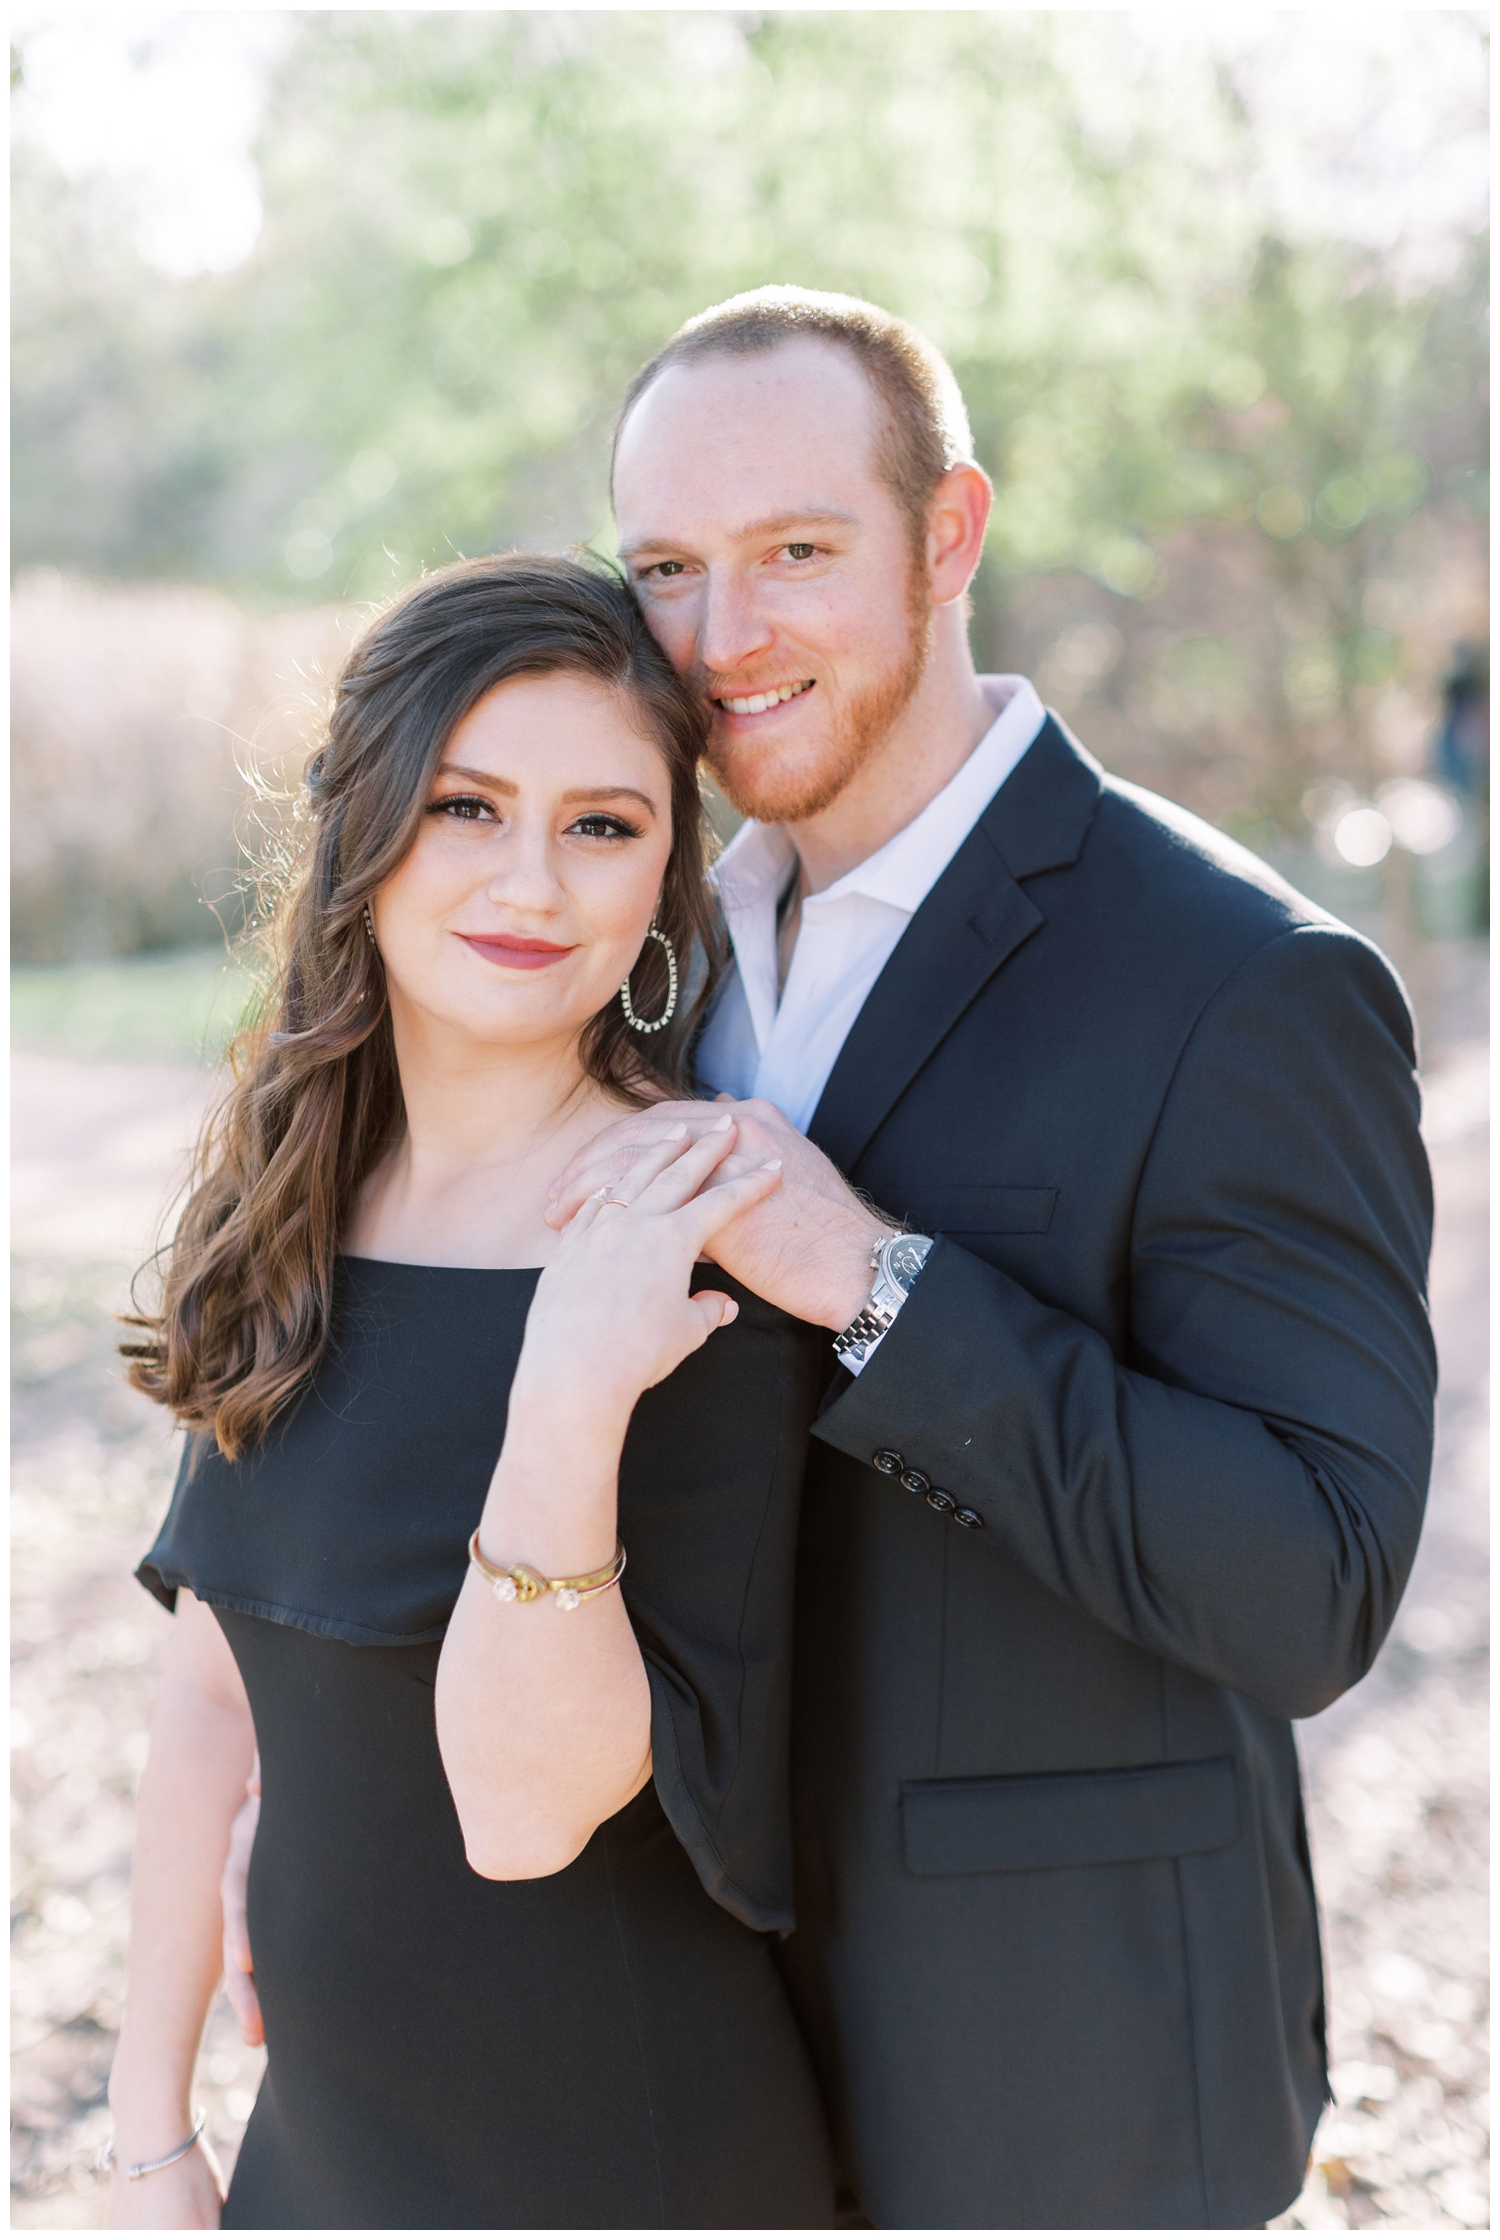 engaged couple in black formal wear outdoor portrait